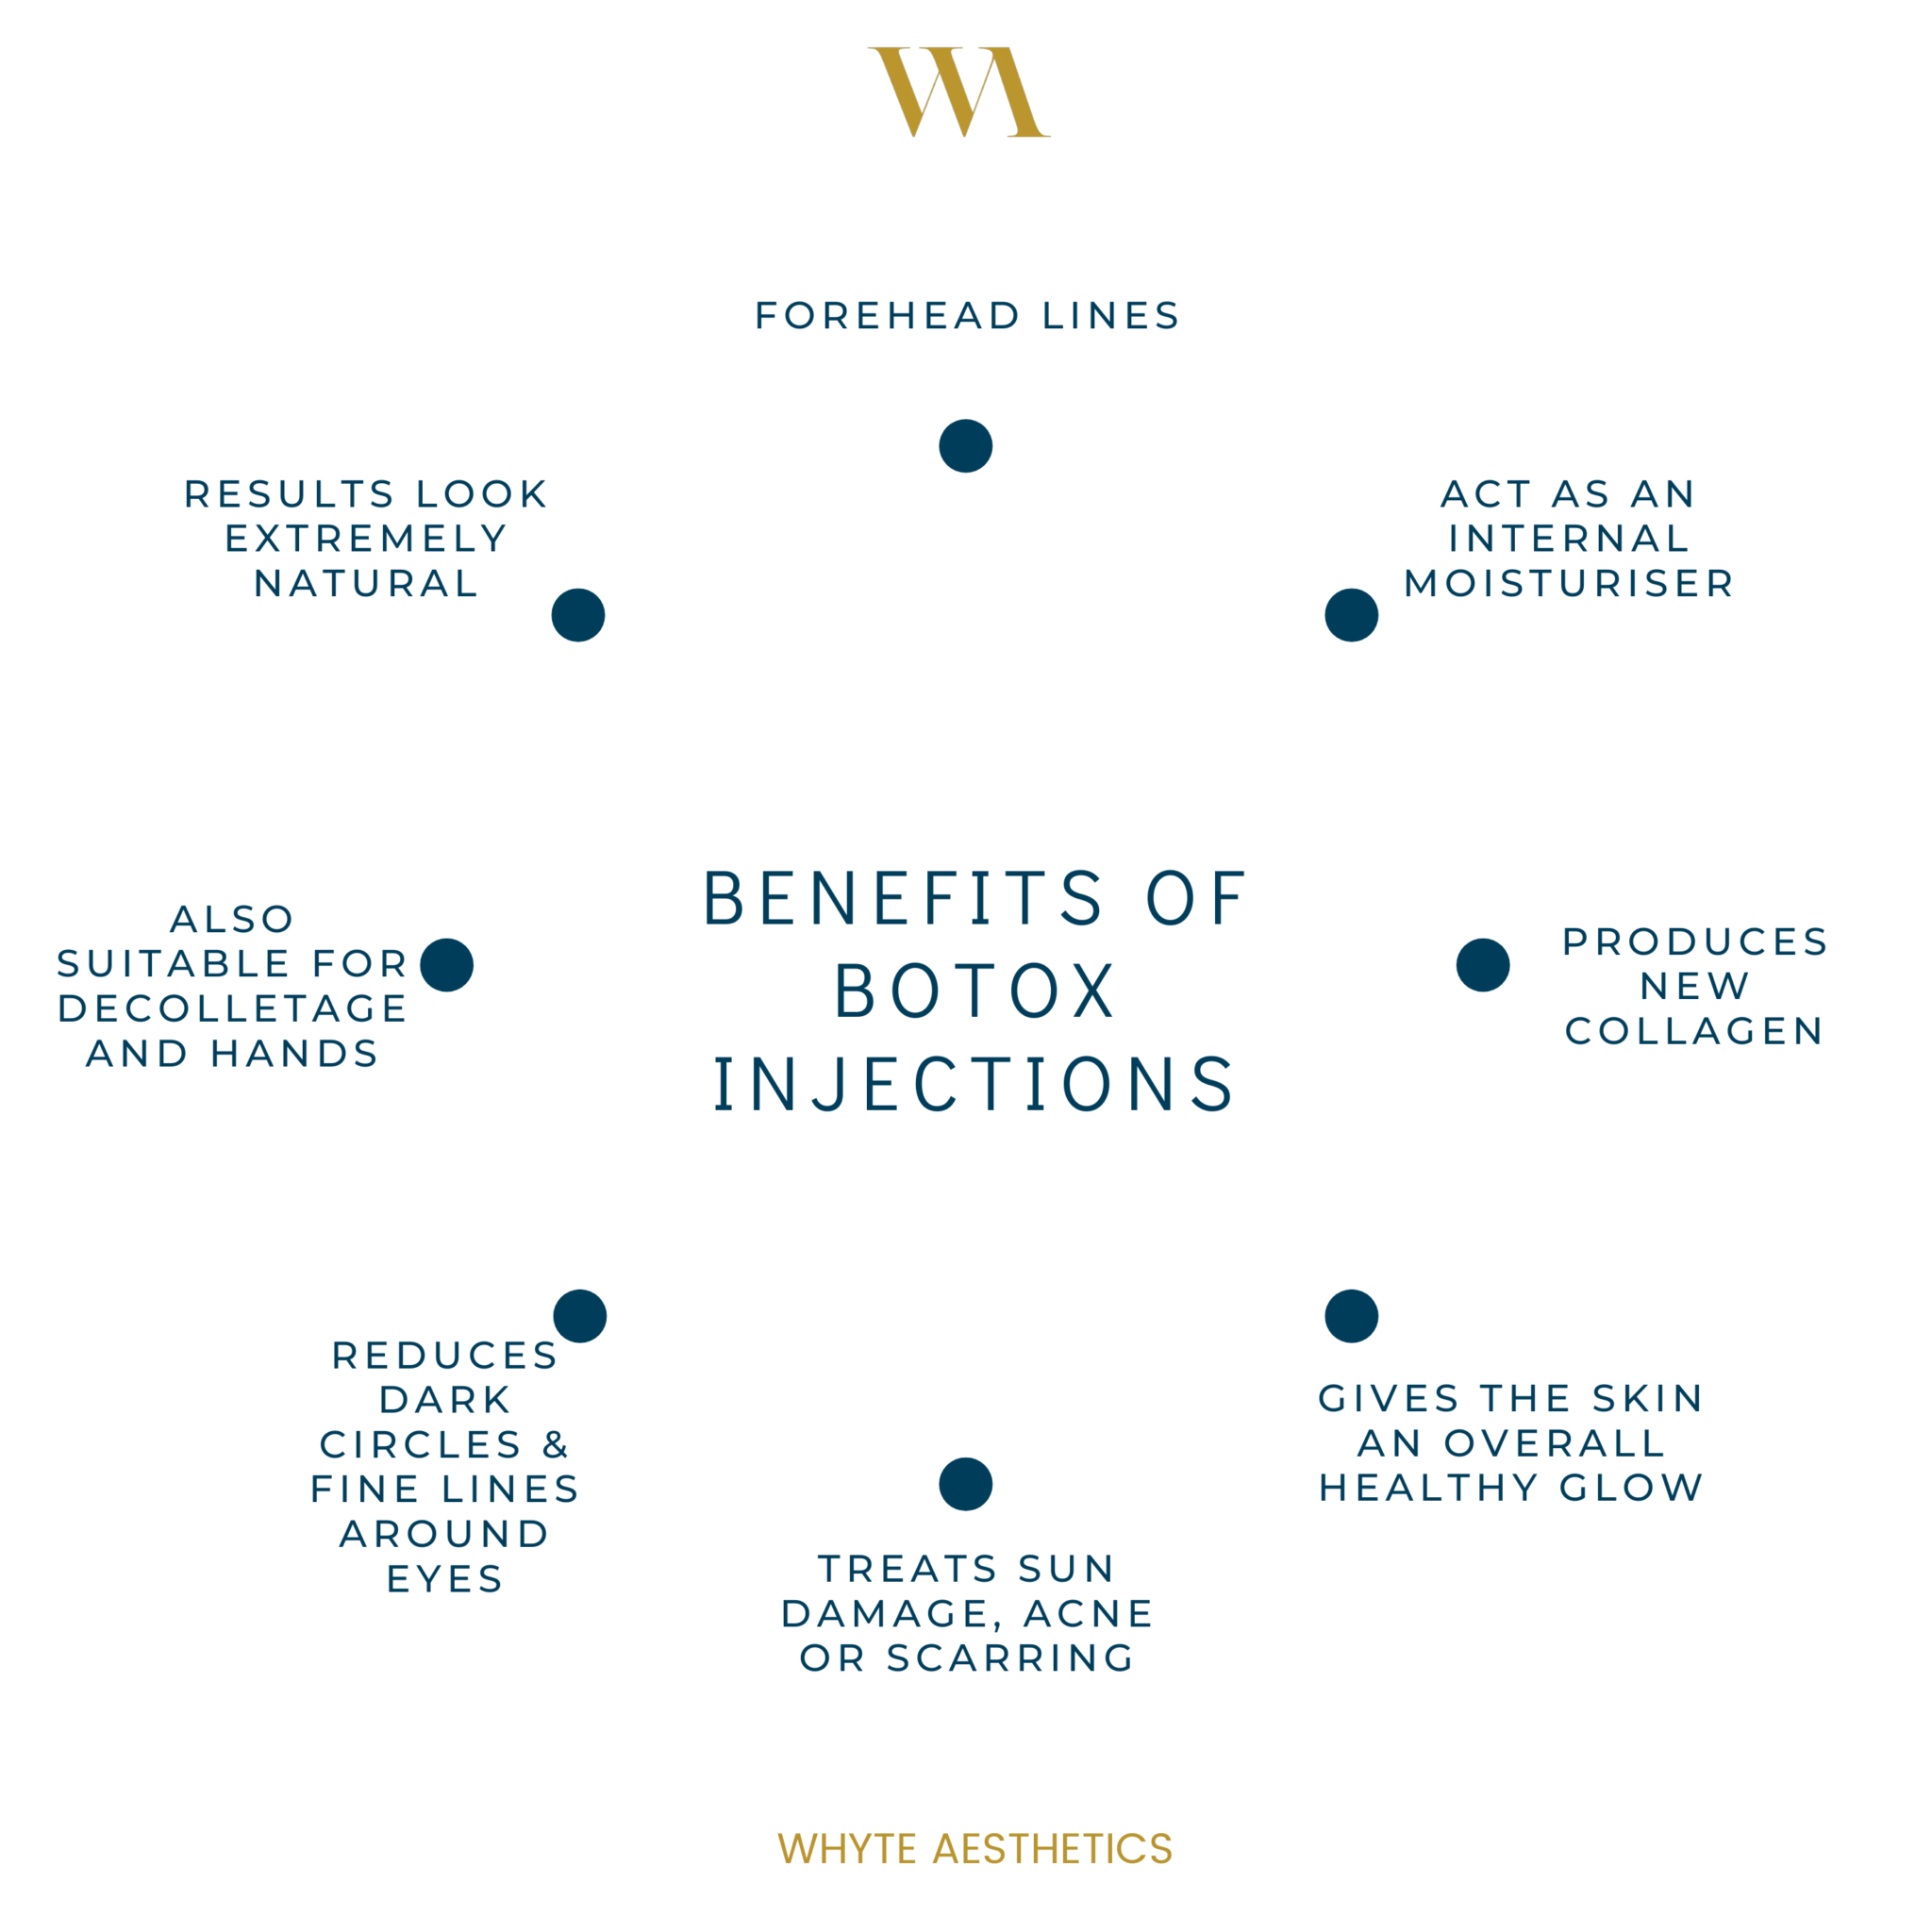 anti wrinkle injections benefits Whyte aesthetics london